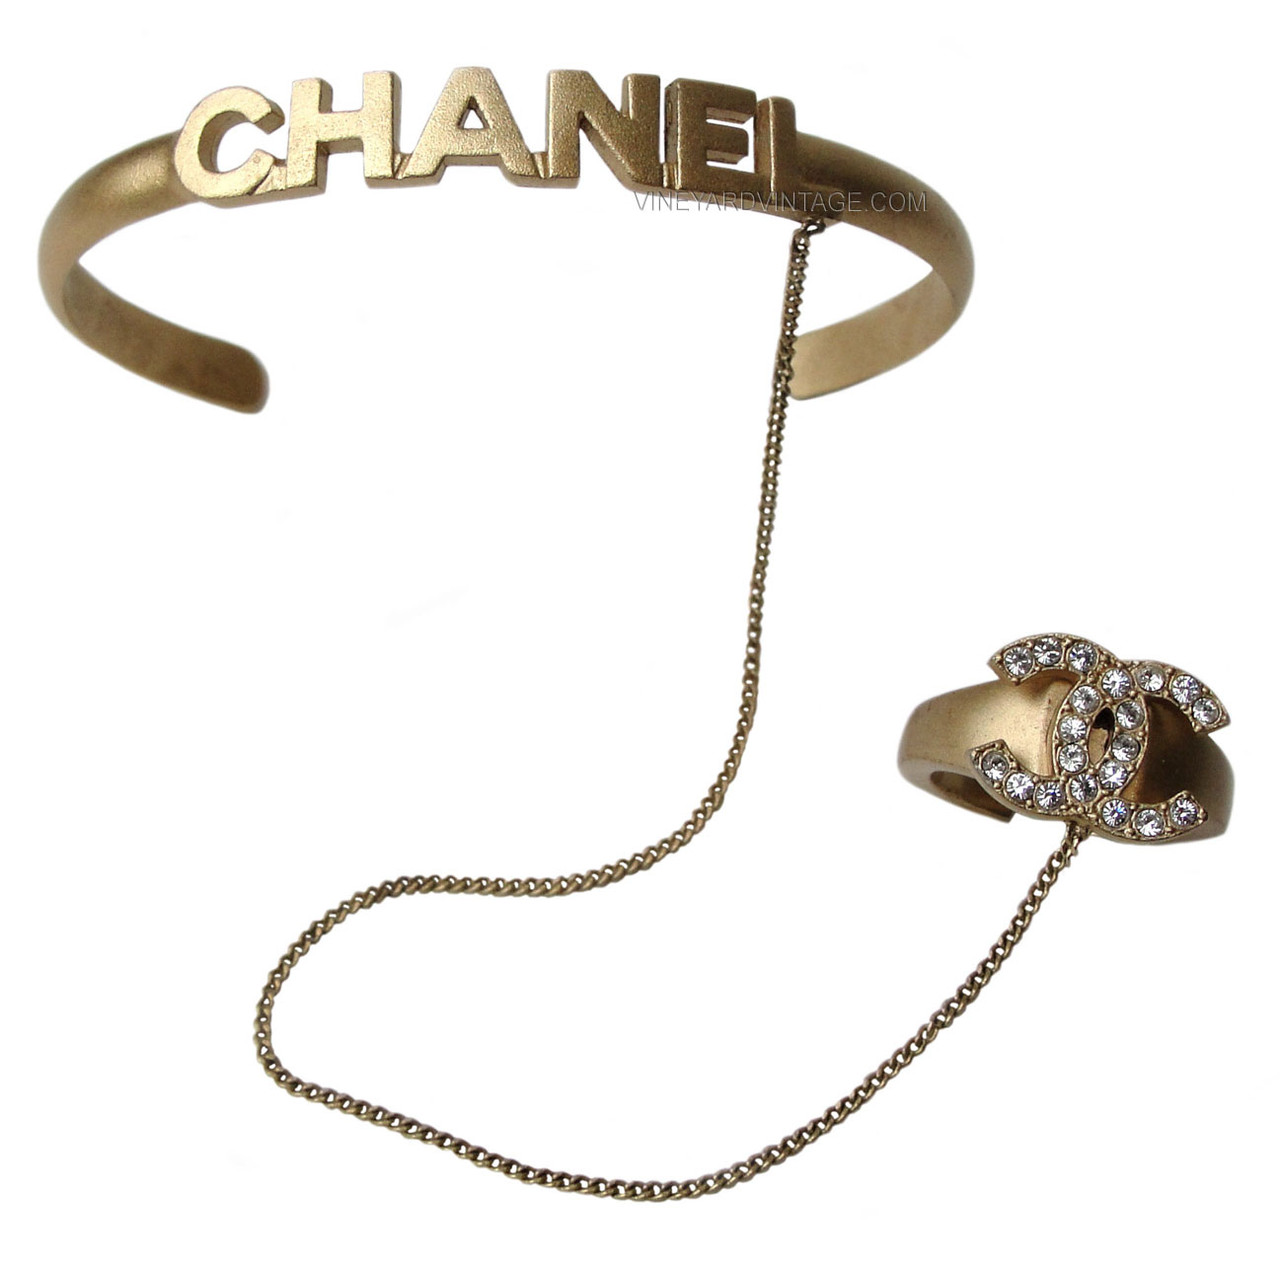 Chanel Rare Crystal CC Ring & Letter Cuff Hand Chain As Seen on Miley Cyrus